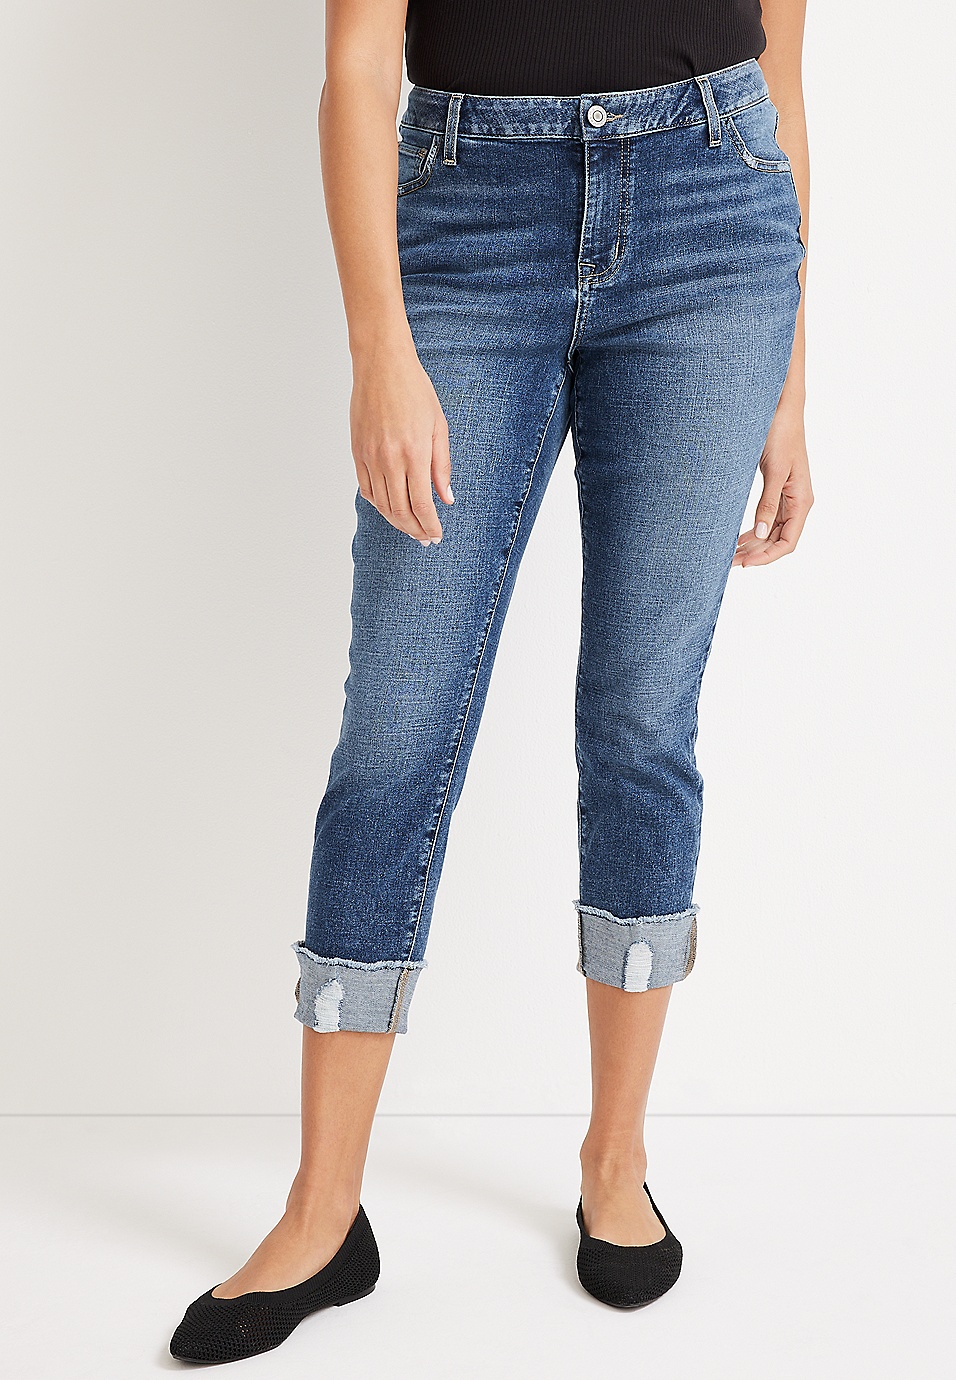 m jeans by Mid Fit Mid Rise Cropped Jegging | maurices